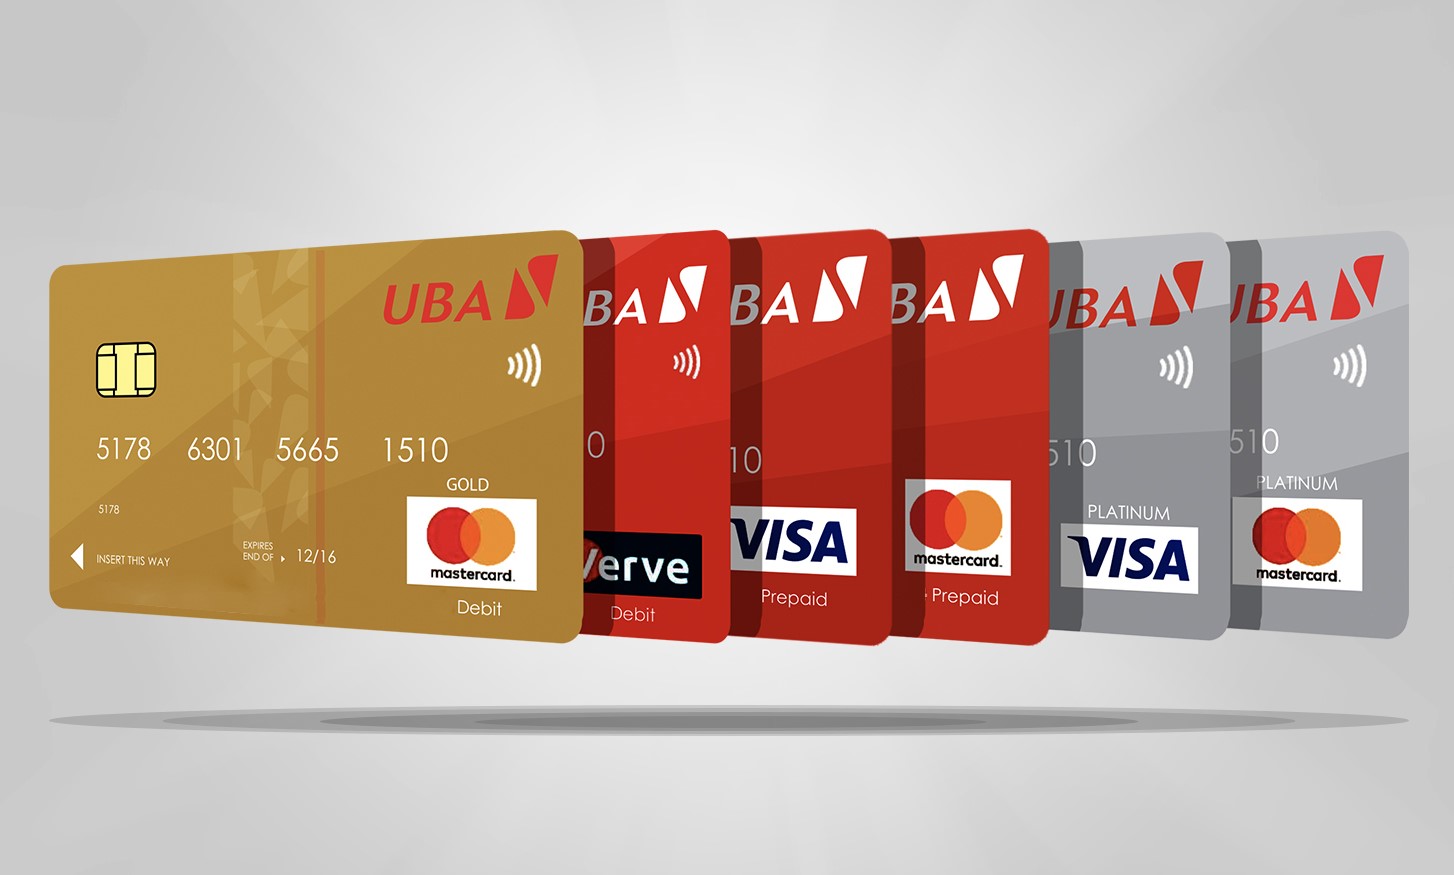 uba-issue-over-3-million-nfc-enabled-contactless-cards-newstage